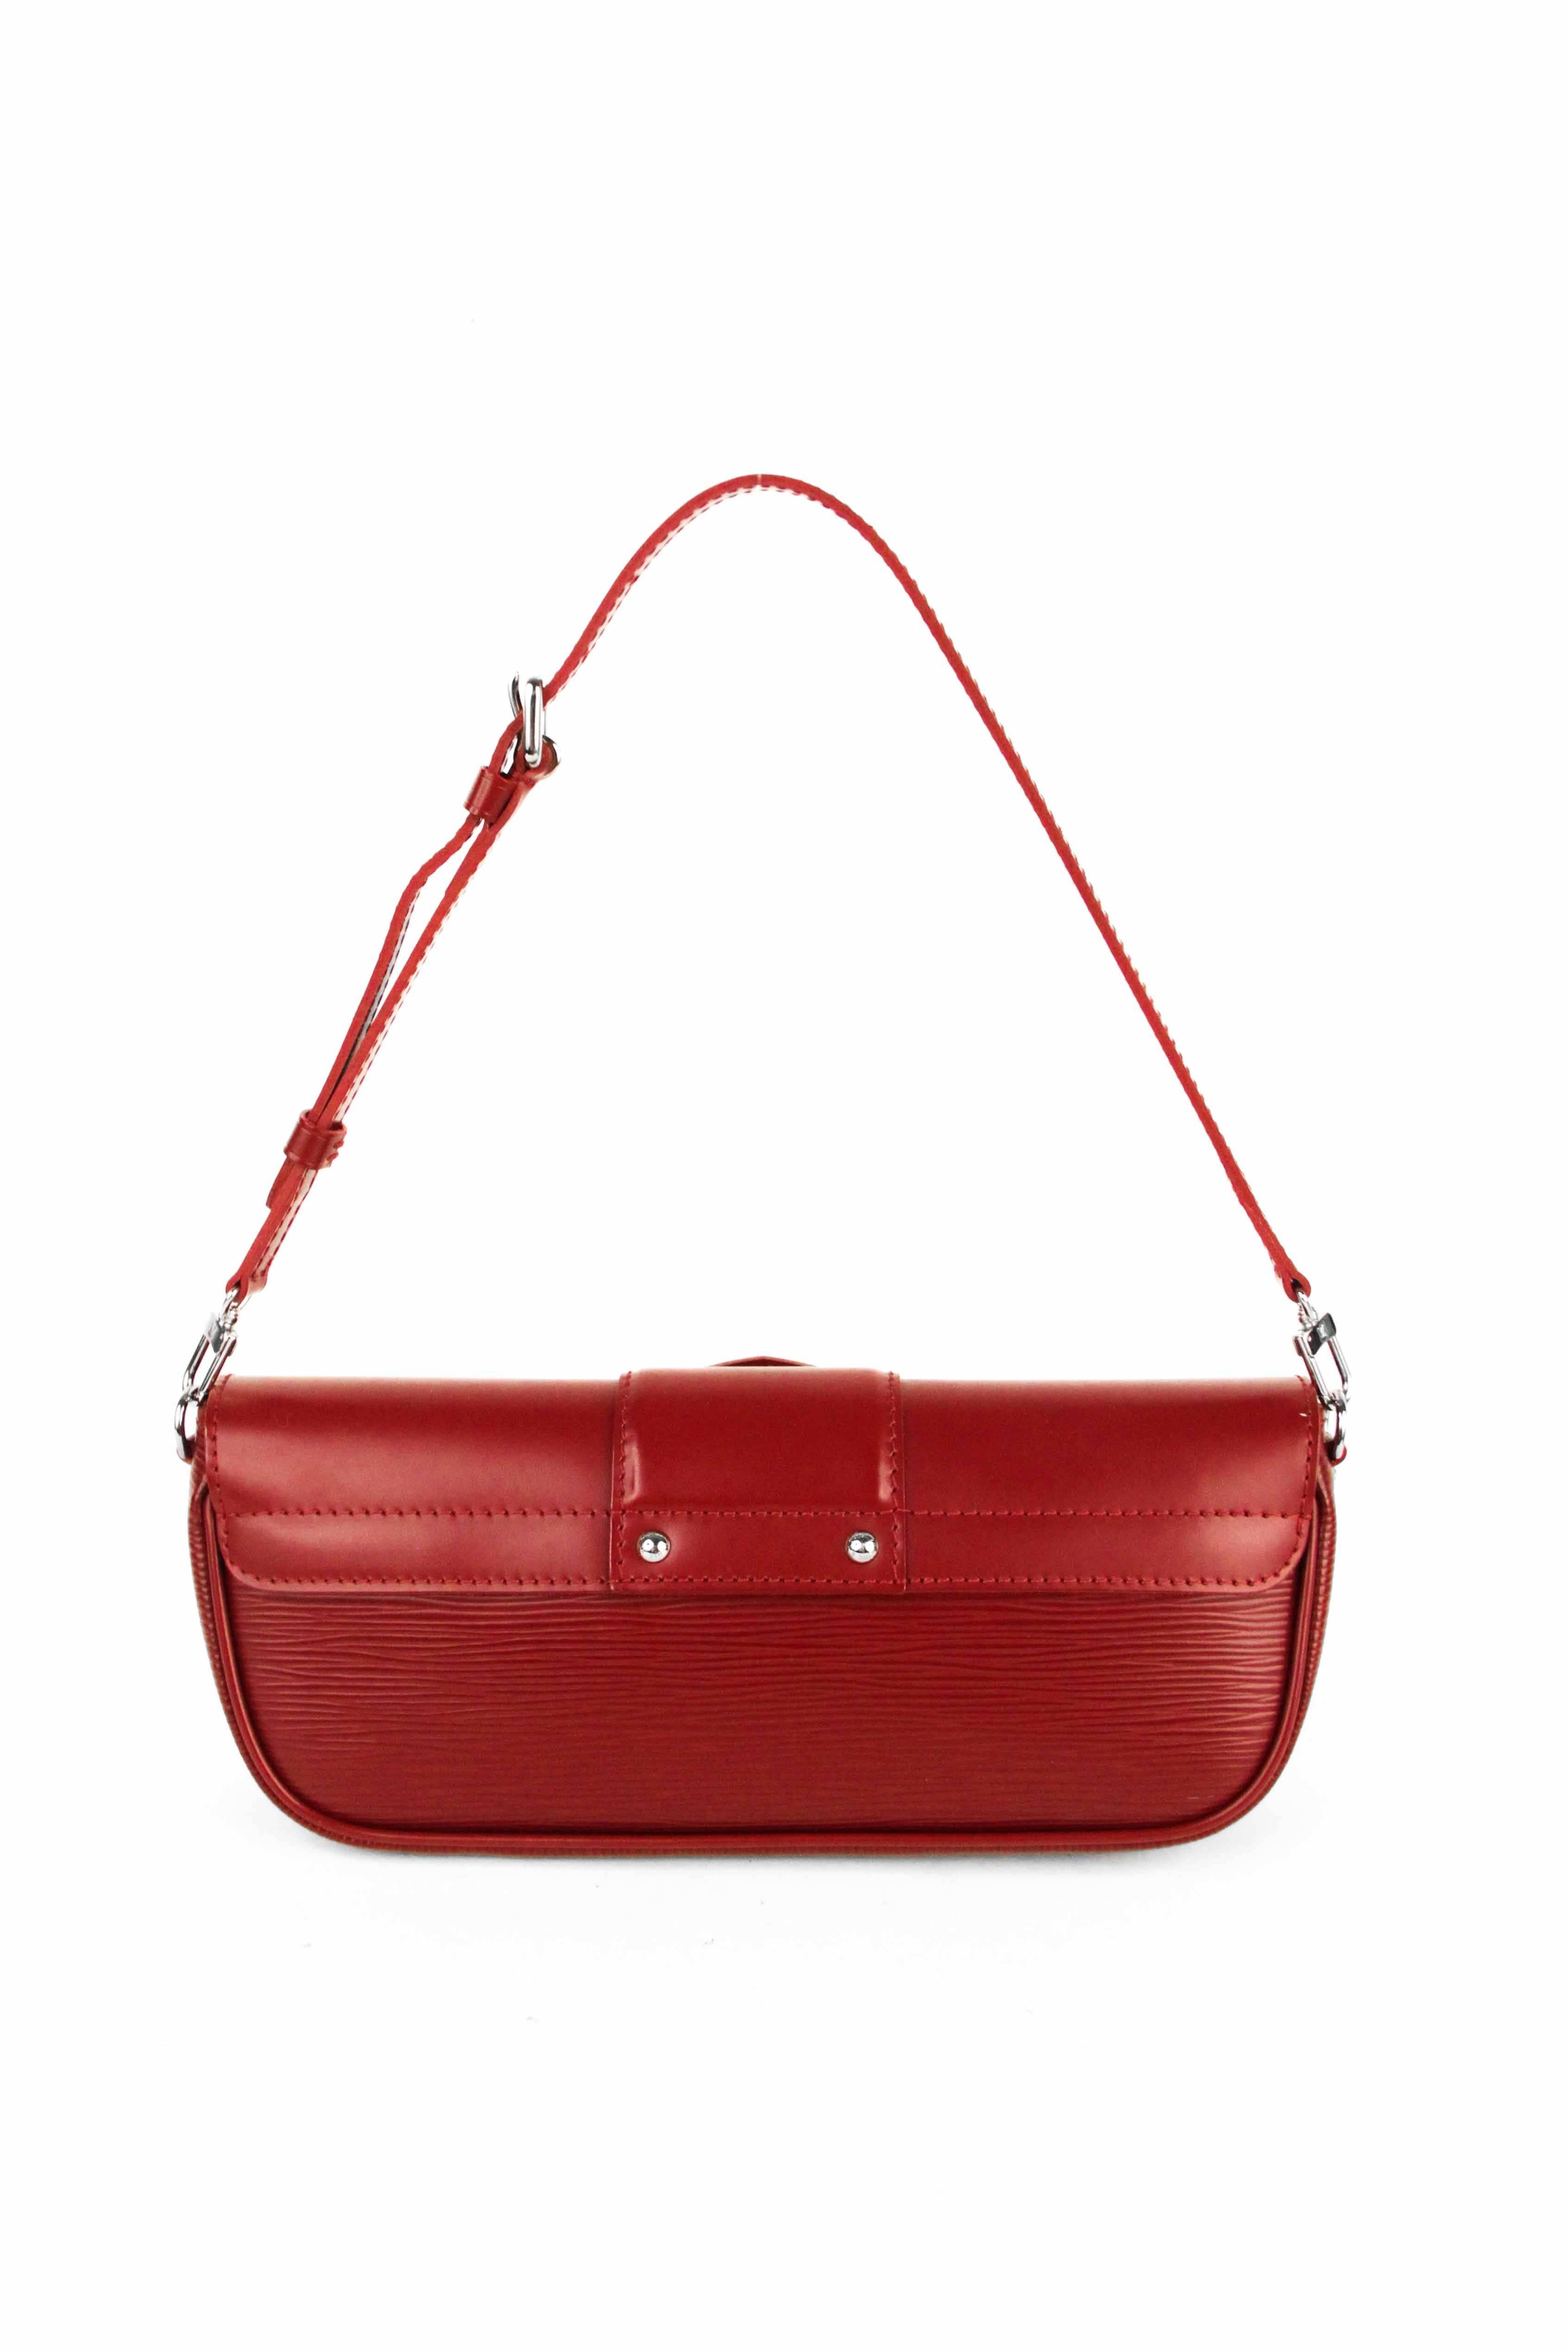 Offered is a perfect red Epi Leather Montaigne Pochette shoulder bag.  Polished silver-tone hardware with a press lock on the front flap.  Flat leather adjustable shoulder strap with silver buckle, can be removed to use bag as a pochette.  Darling